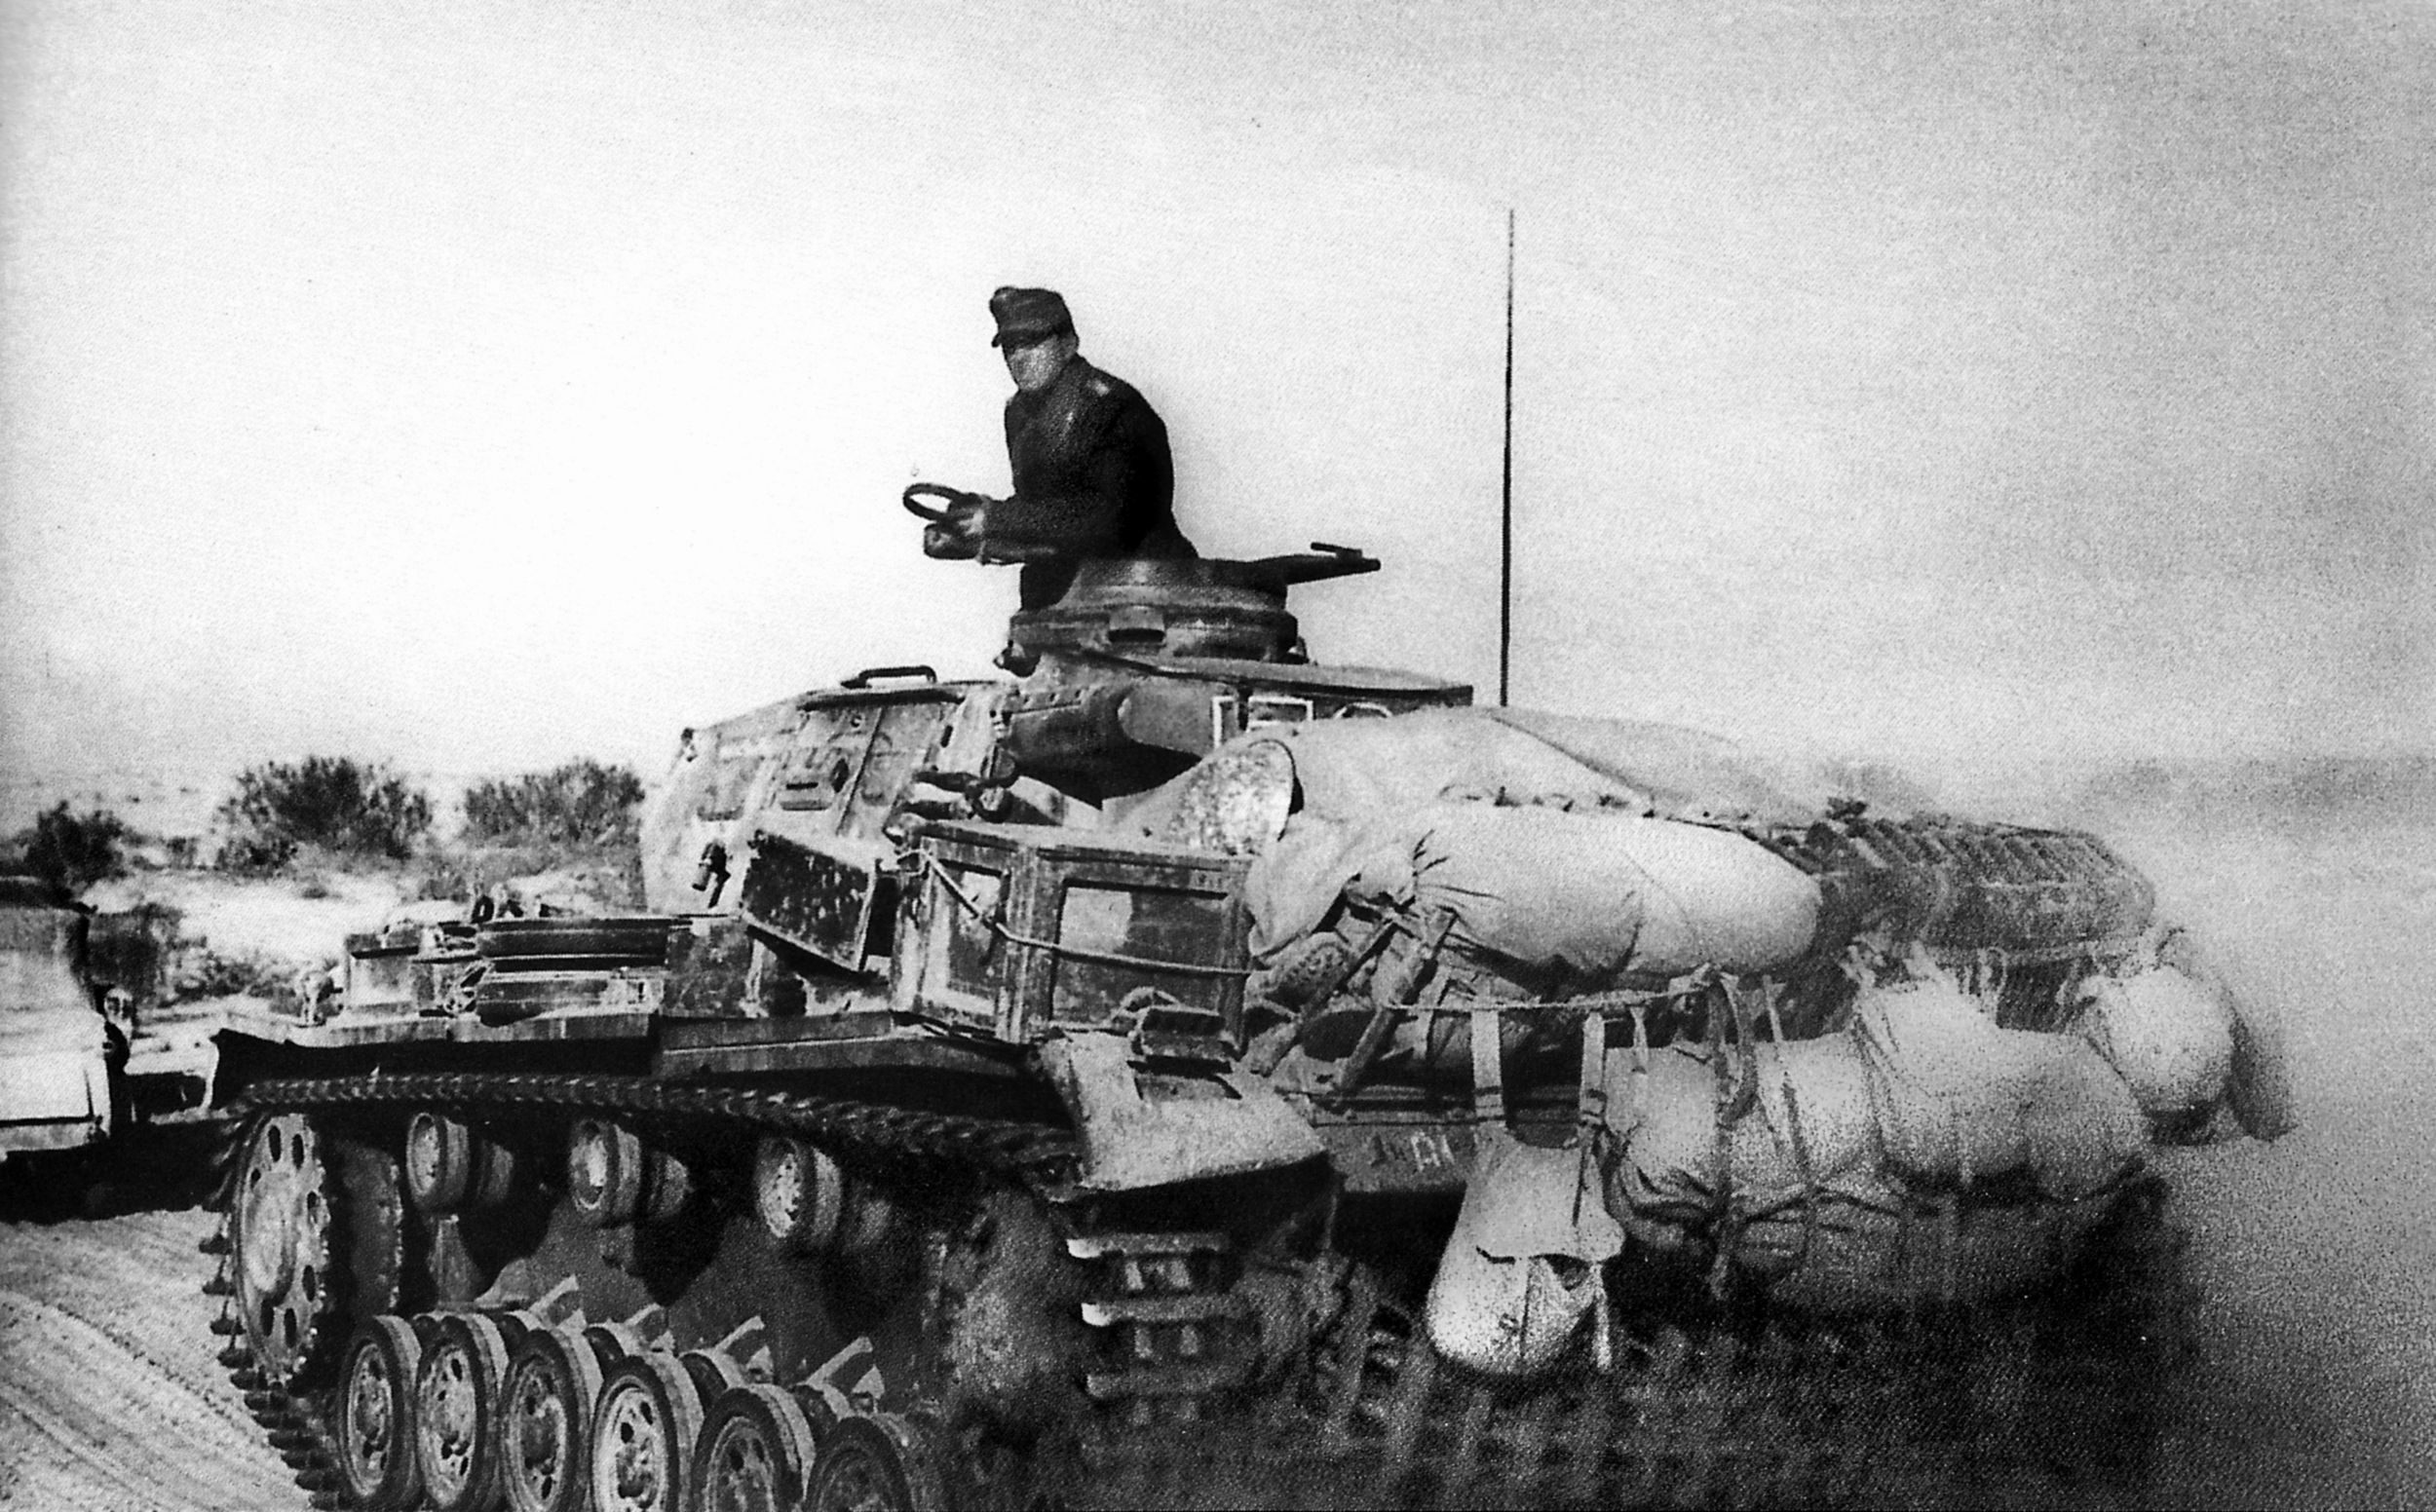 An Afrika Korp panzer, loaded with gear, travels over a desert track during the advance on Tobruk in March, 1941. The besieged Allied forces in Tobruk, supplied by sea, would hold out for 242 days until New Zealand troops of the British Eighth Army broke through on December 7, 1941. Rommel would finally take Tobruk on June 20, 1942.